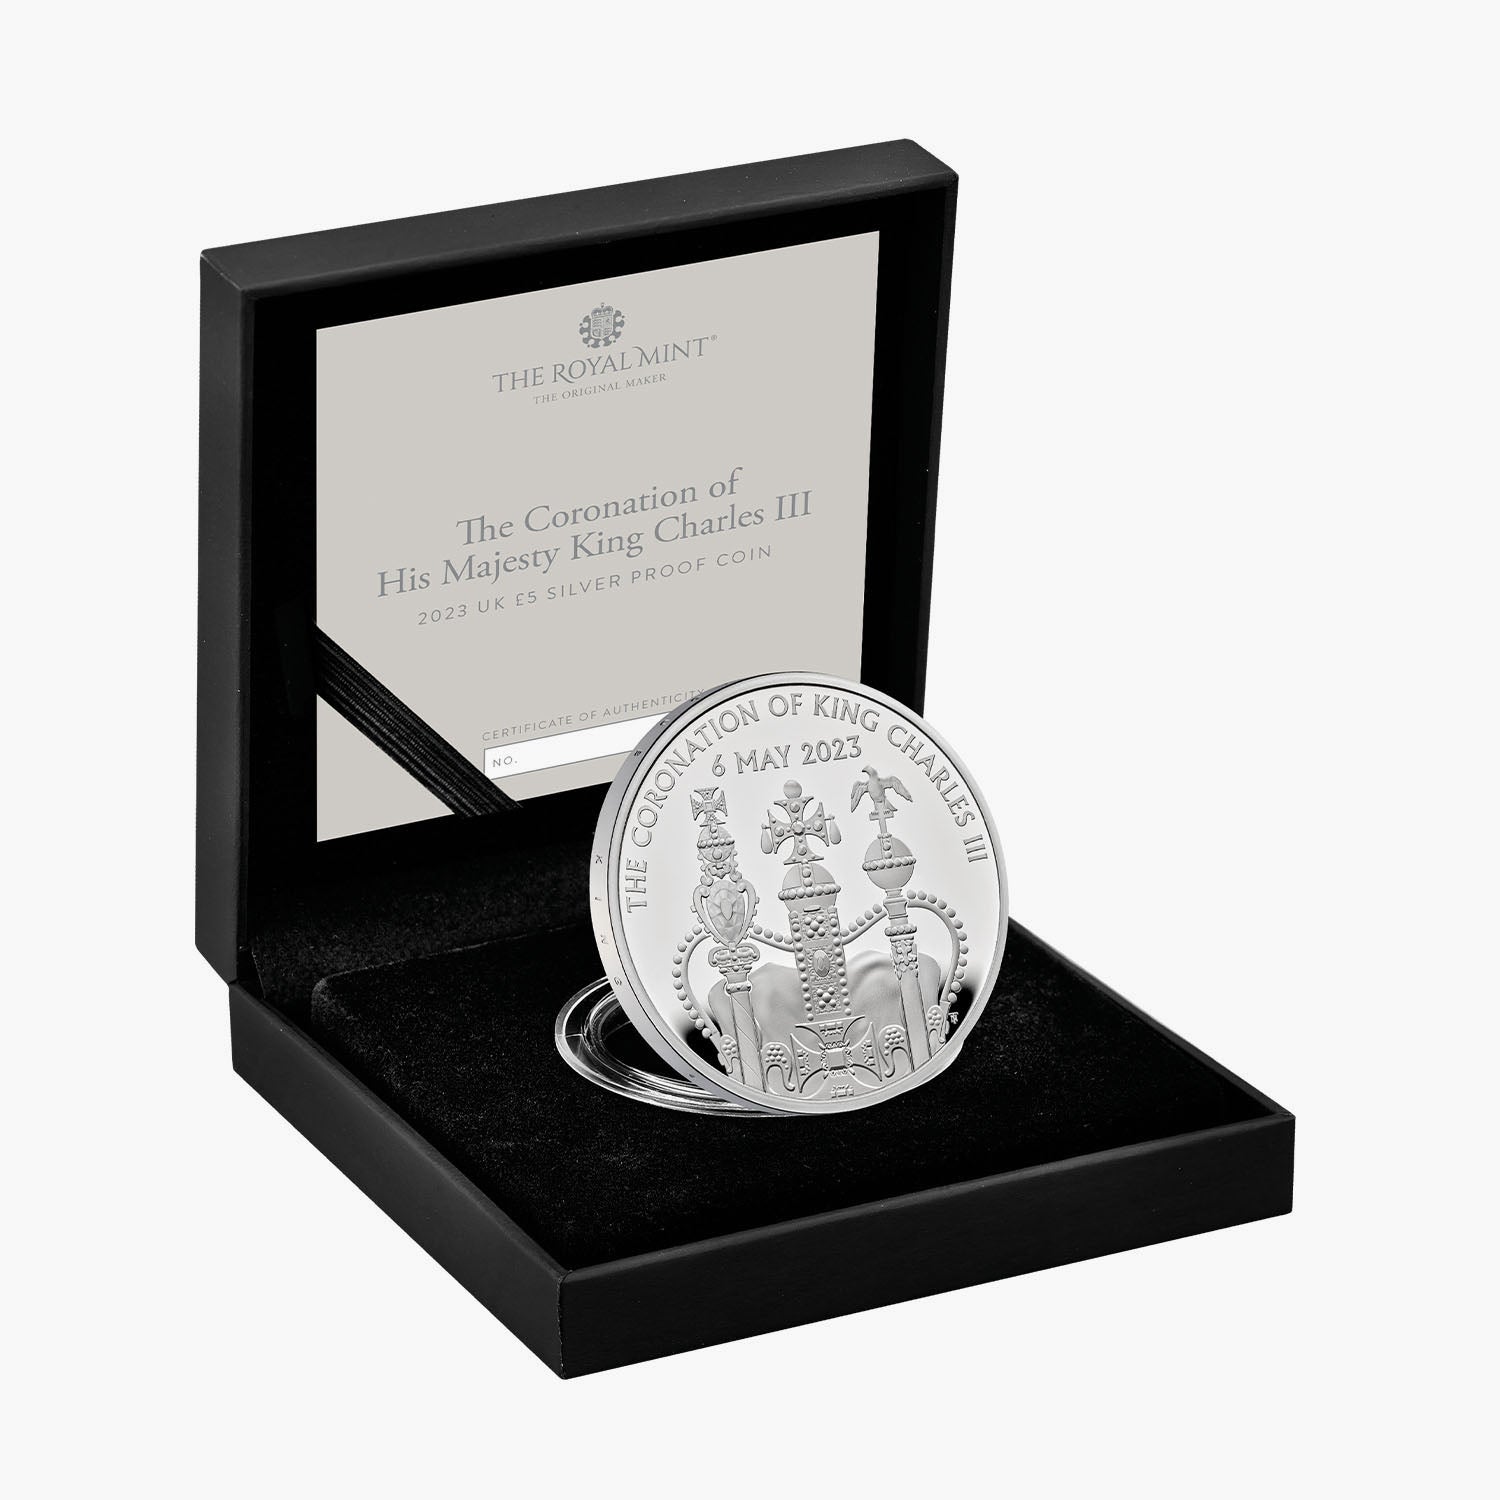 The Coronation of His Majesty King Charles £5.00 Silver Proof